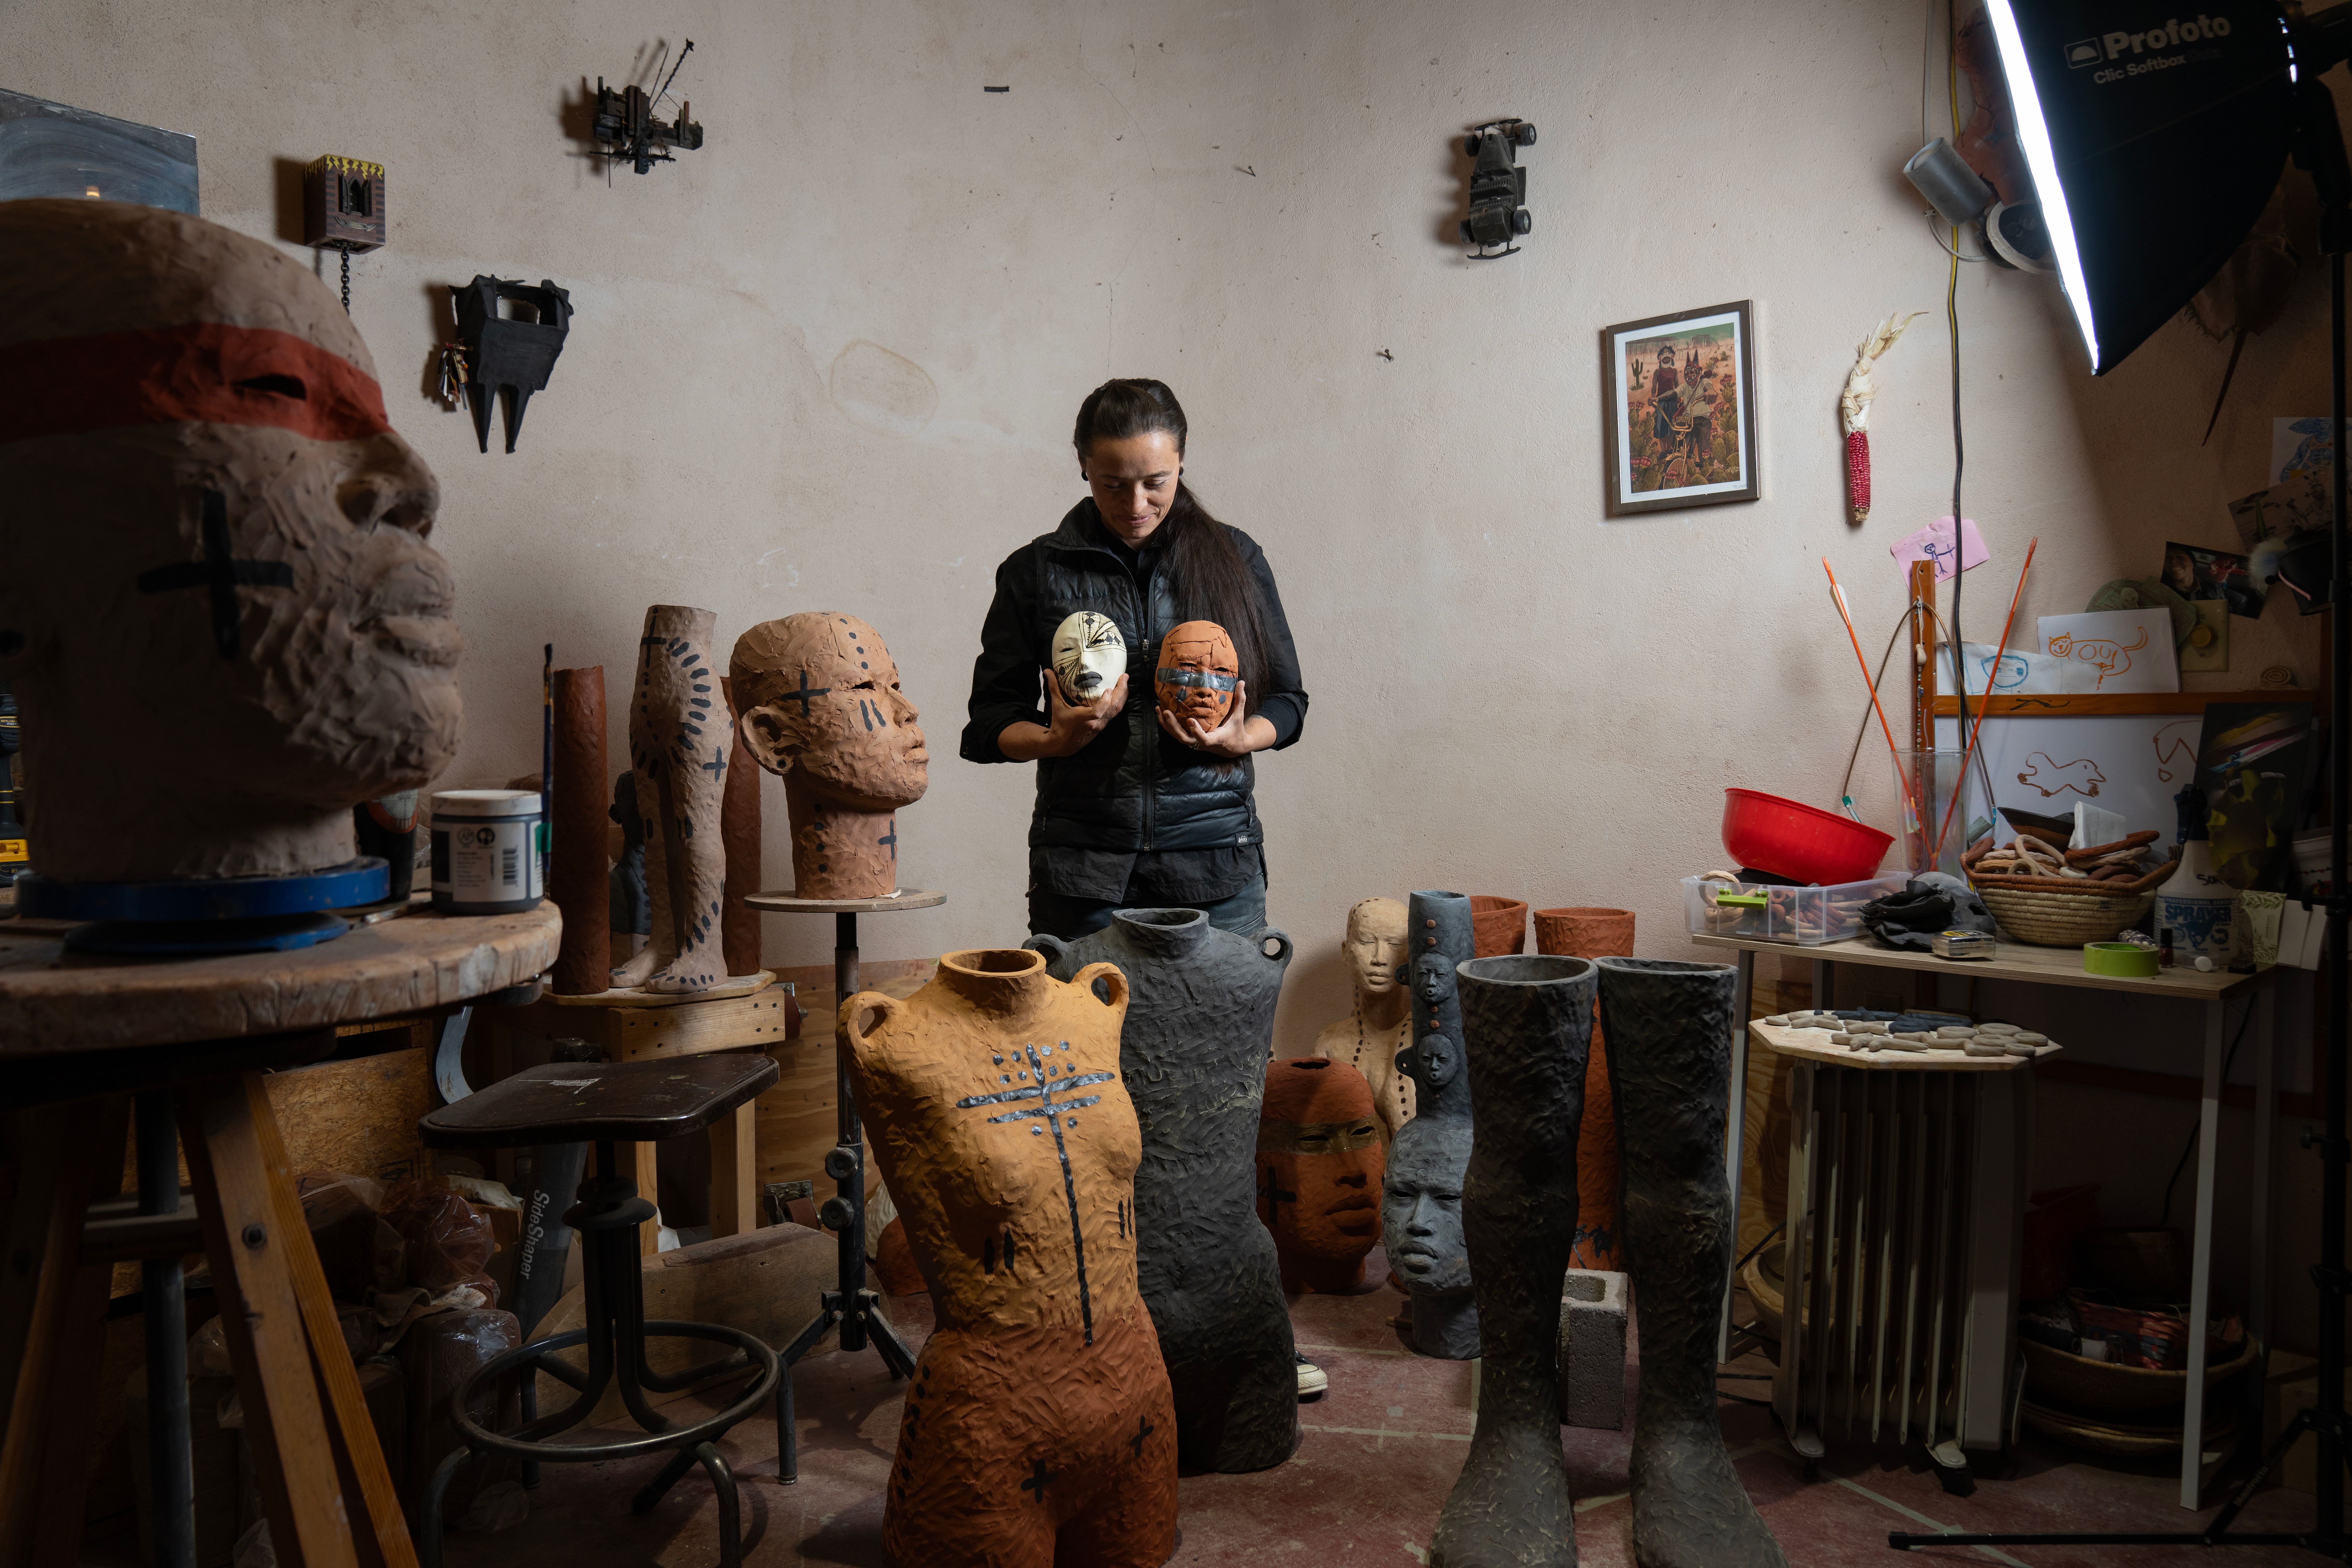 A portrait of Rose holding two ceramic masks in her studio